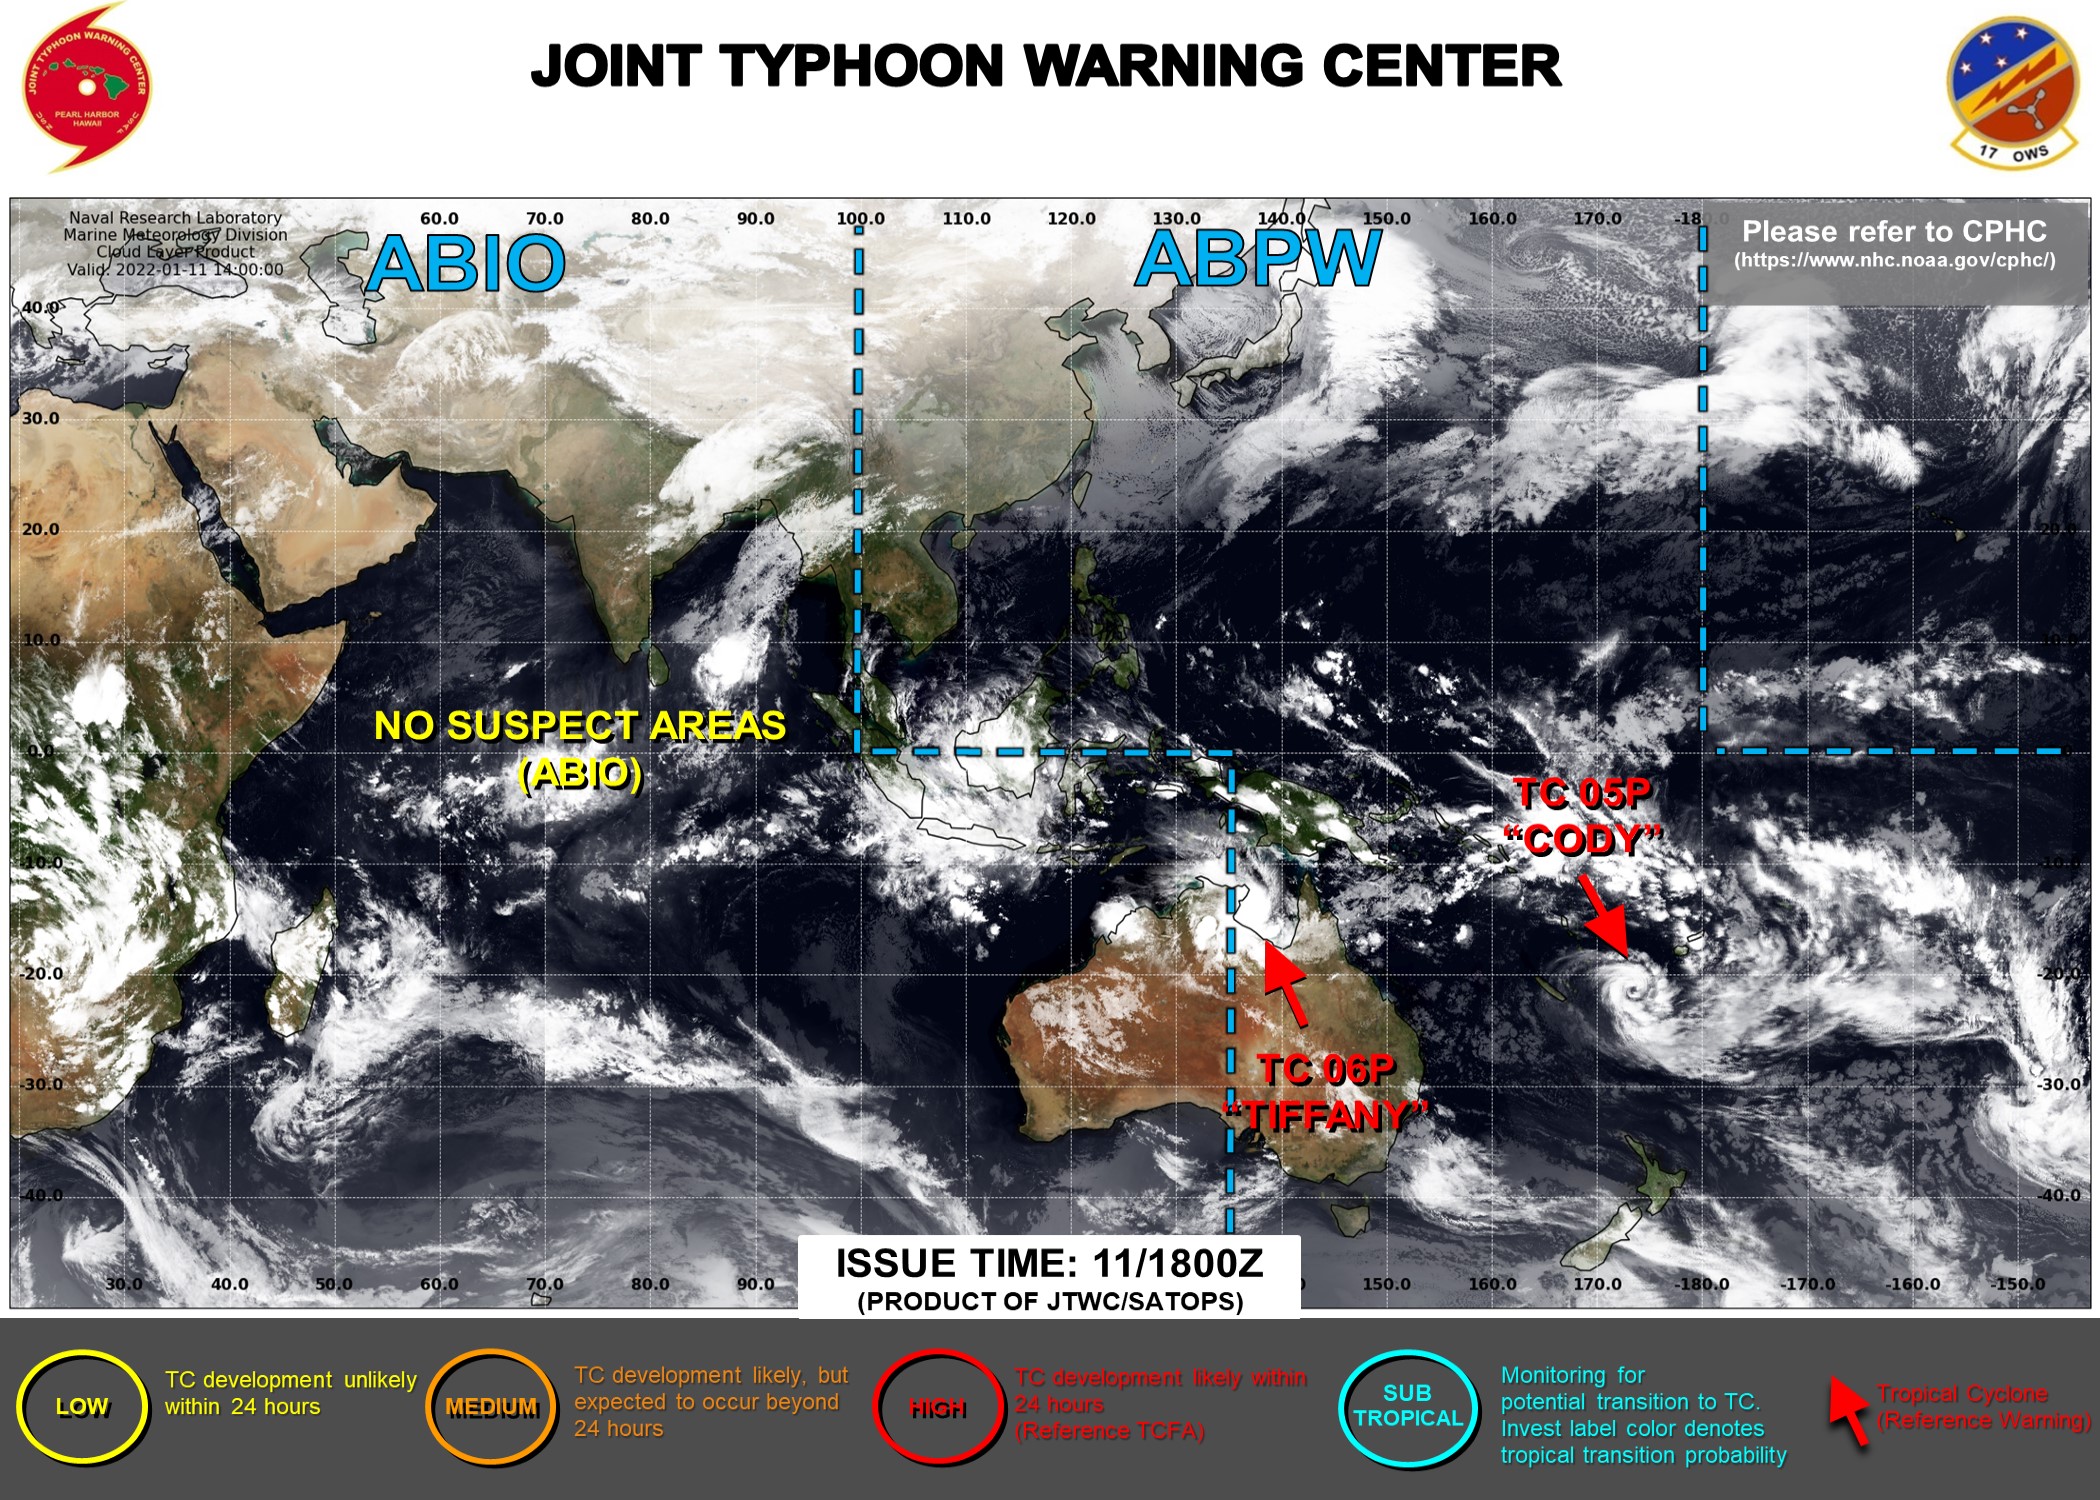 JTWC IS ISSUING 6HOURLY WARNINGS ON TC 05P(CODY). WARNING 12/FINAL ON TC 06P(TIFFANY) IS ISSUED AT 12/03UTC.THE OVER-LAND SYSTEM WILL BE CLOSELY MONITORED. 3HOURLY SATELLITE BULLETINS ARE STILL ISSUED ON BOTH SYSTEMS.